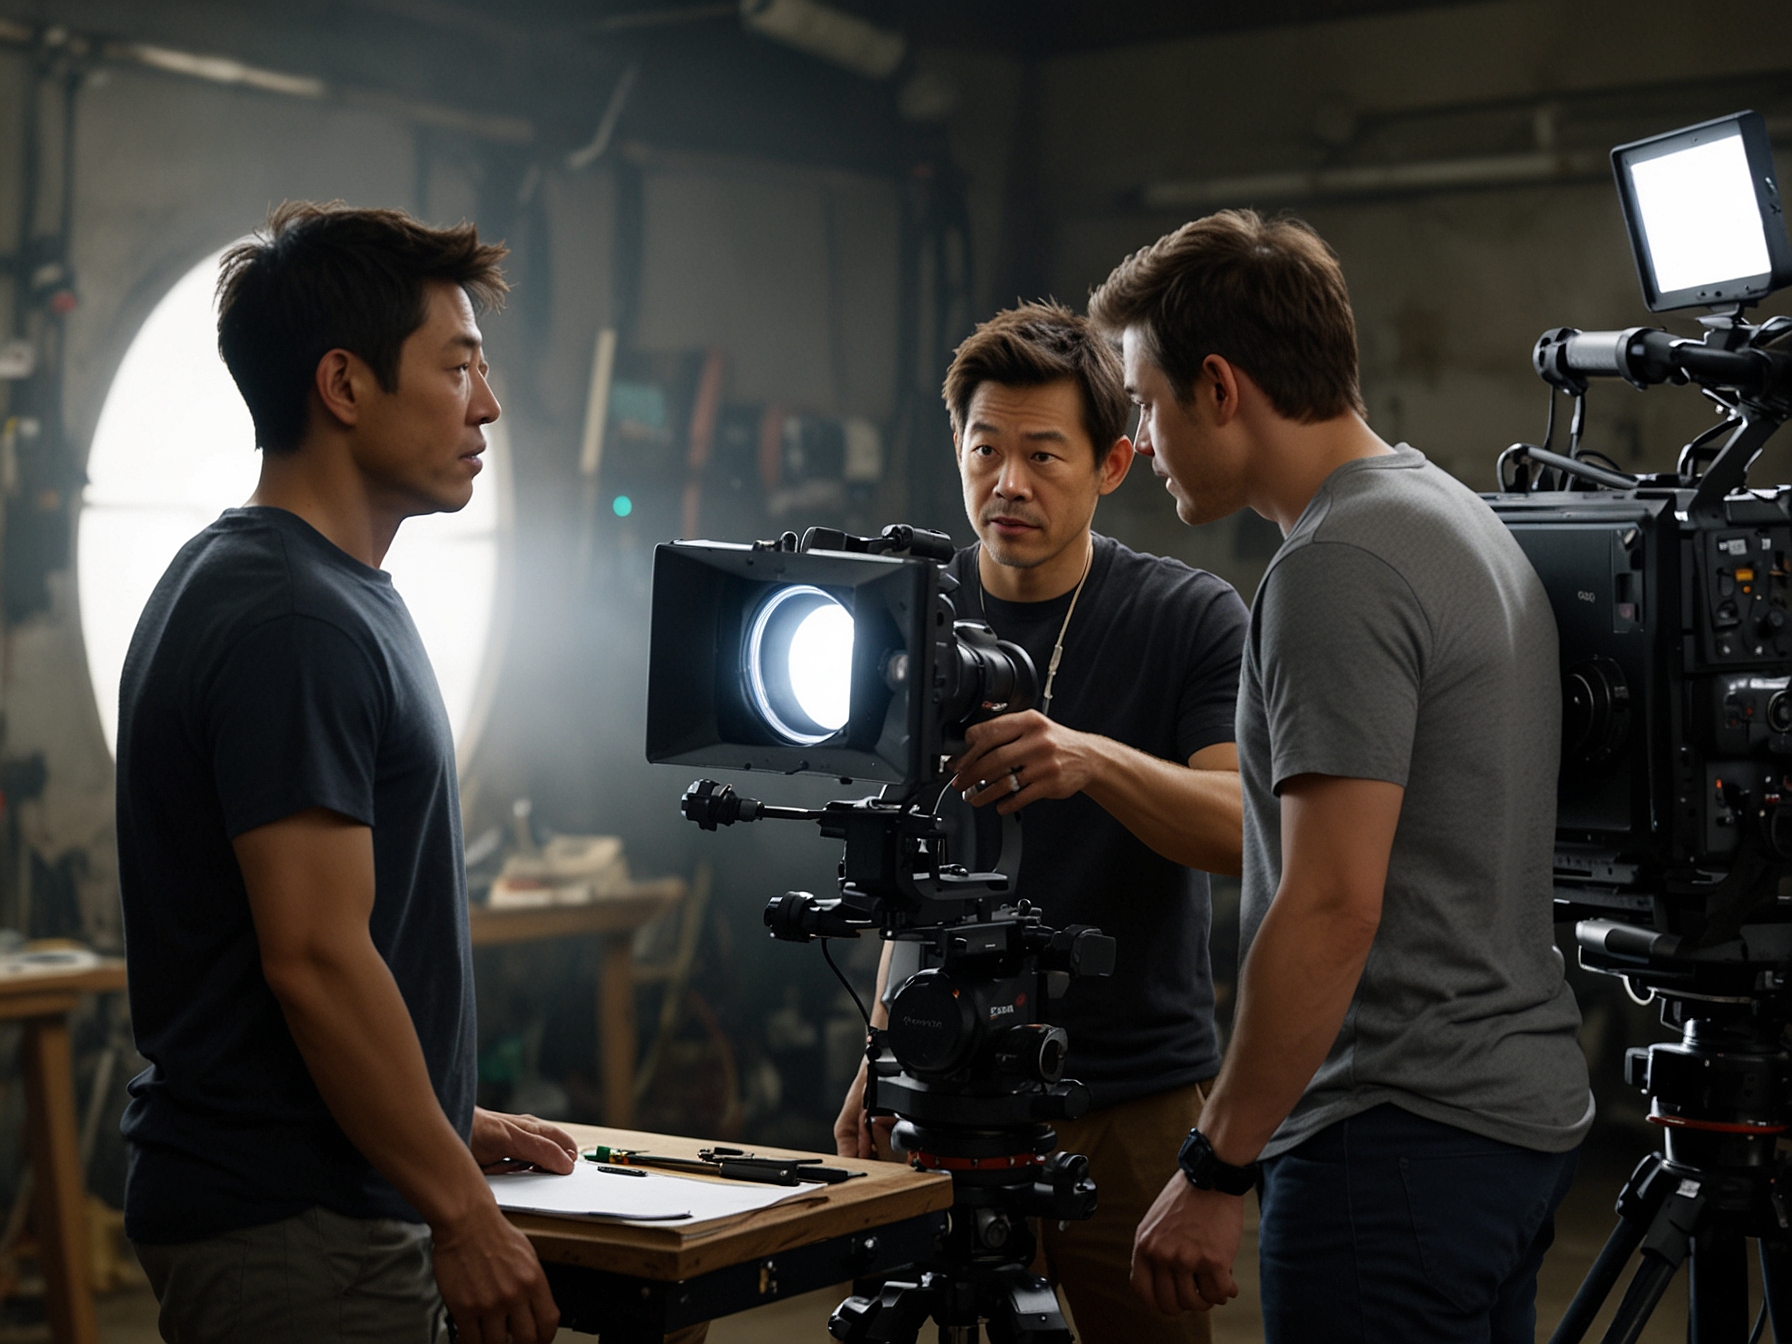 The collaborative duo of James Wan and Jason Blum discussing scenes on set, surrounded by cameras and crew, showcasing the meticulous and innovative approach to filmmaking for Soulm8te.